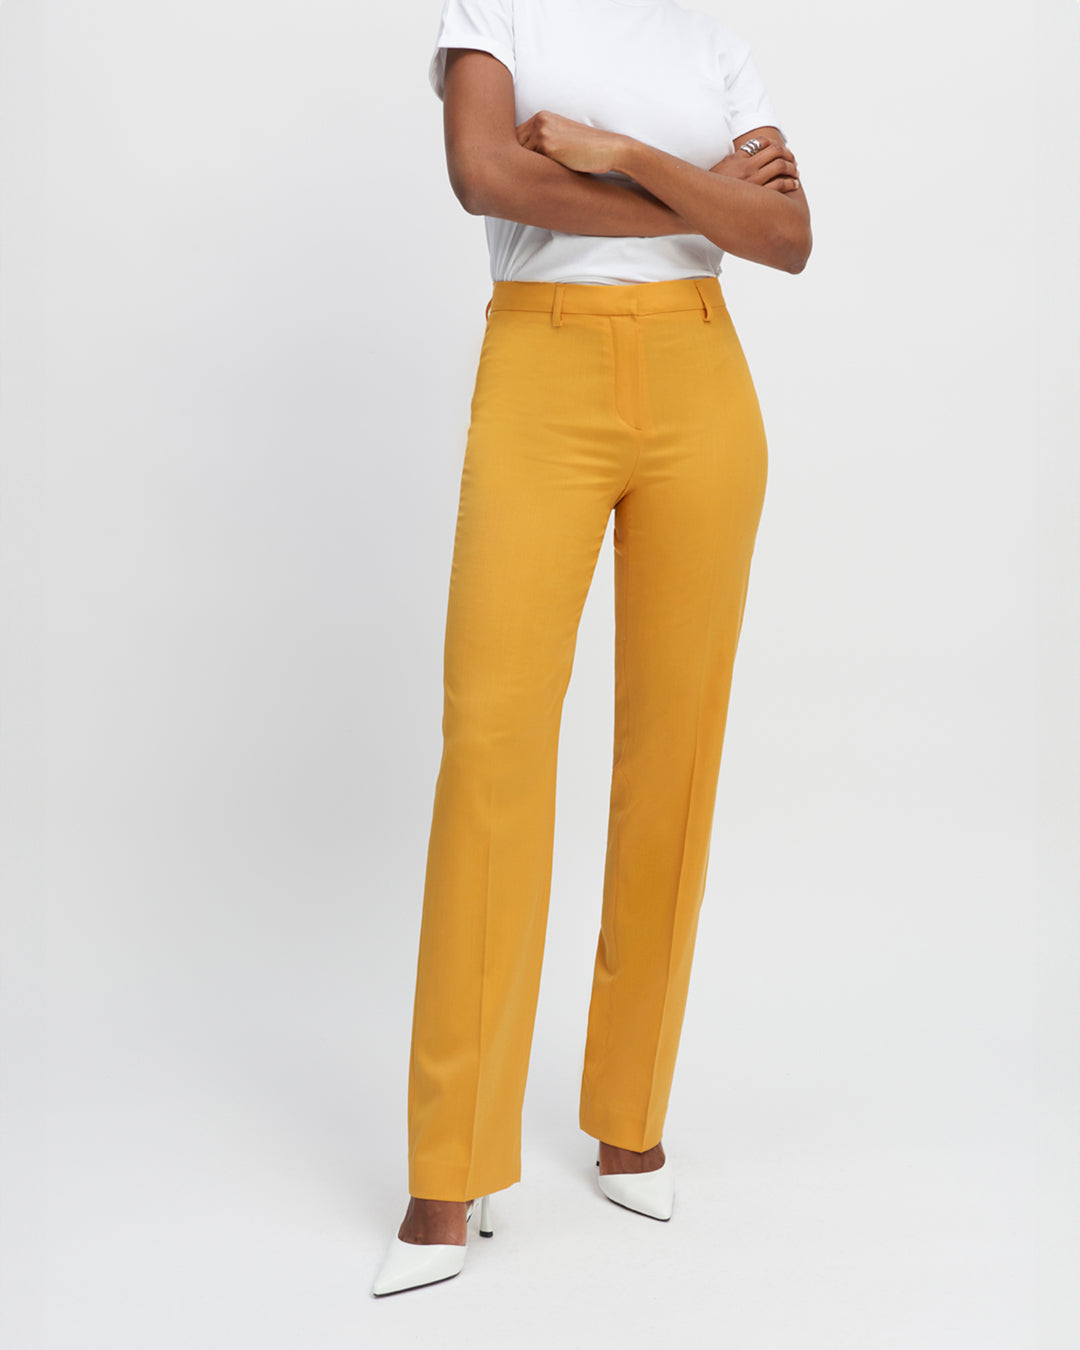 Trousers-yellow-Straight-cut-High-waist-Lined-front-Zip-with-hook-17H10-tailors-for-women-paris-